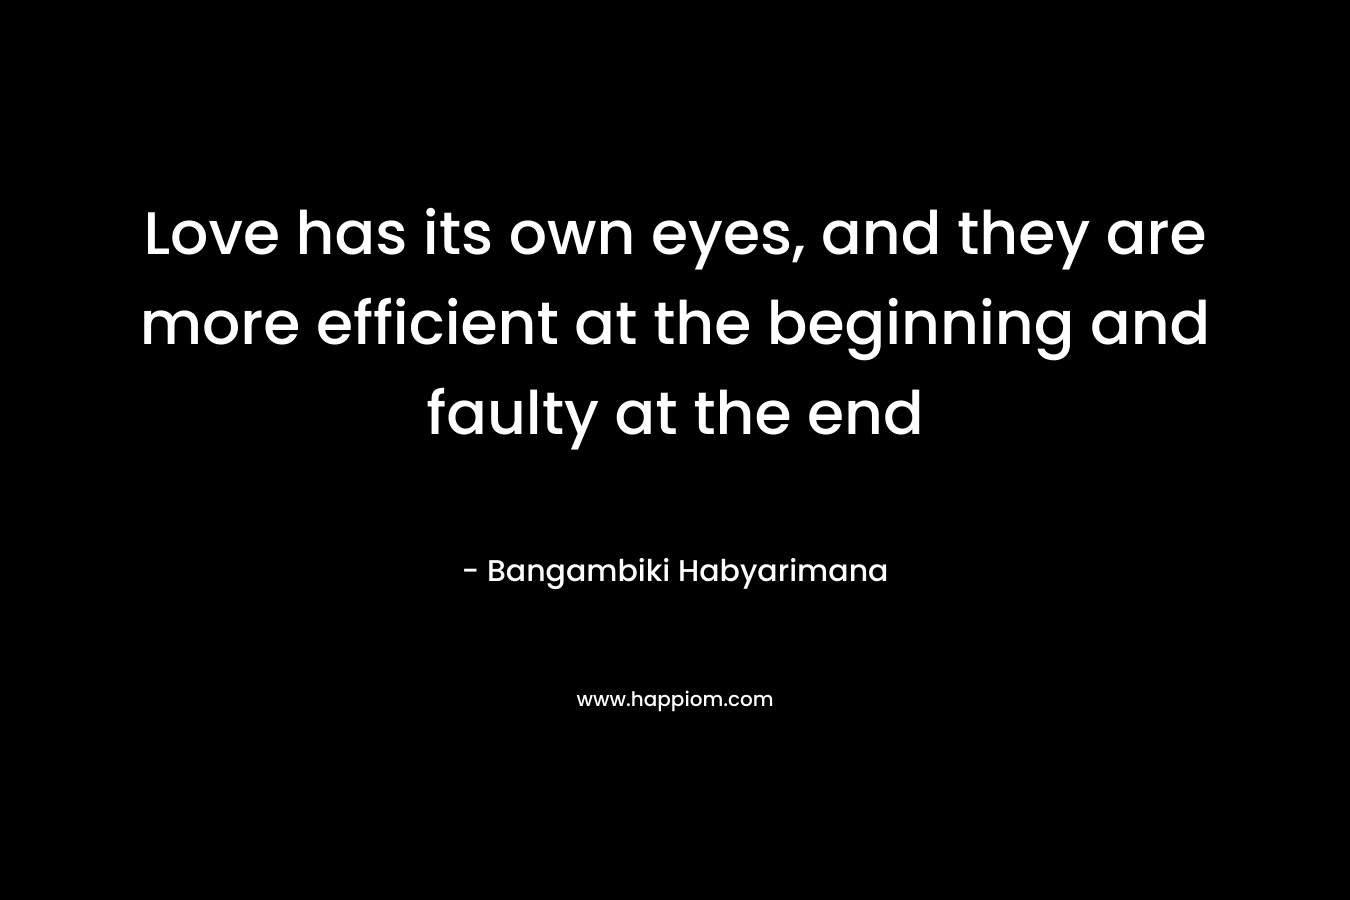 Love has its own eyes, and they are more efficient at the beginning and faulty at the end – Bangambiki Habyarimana